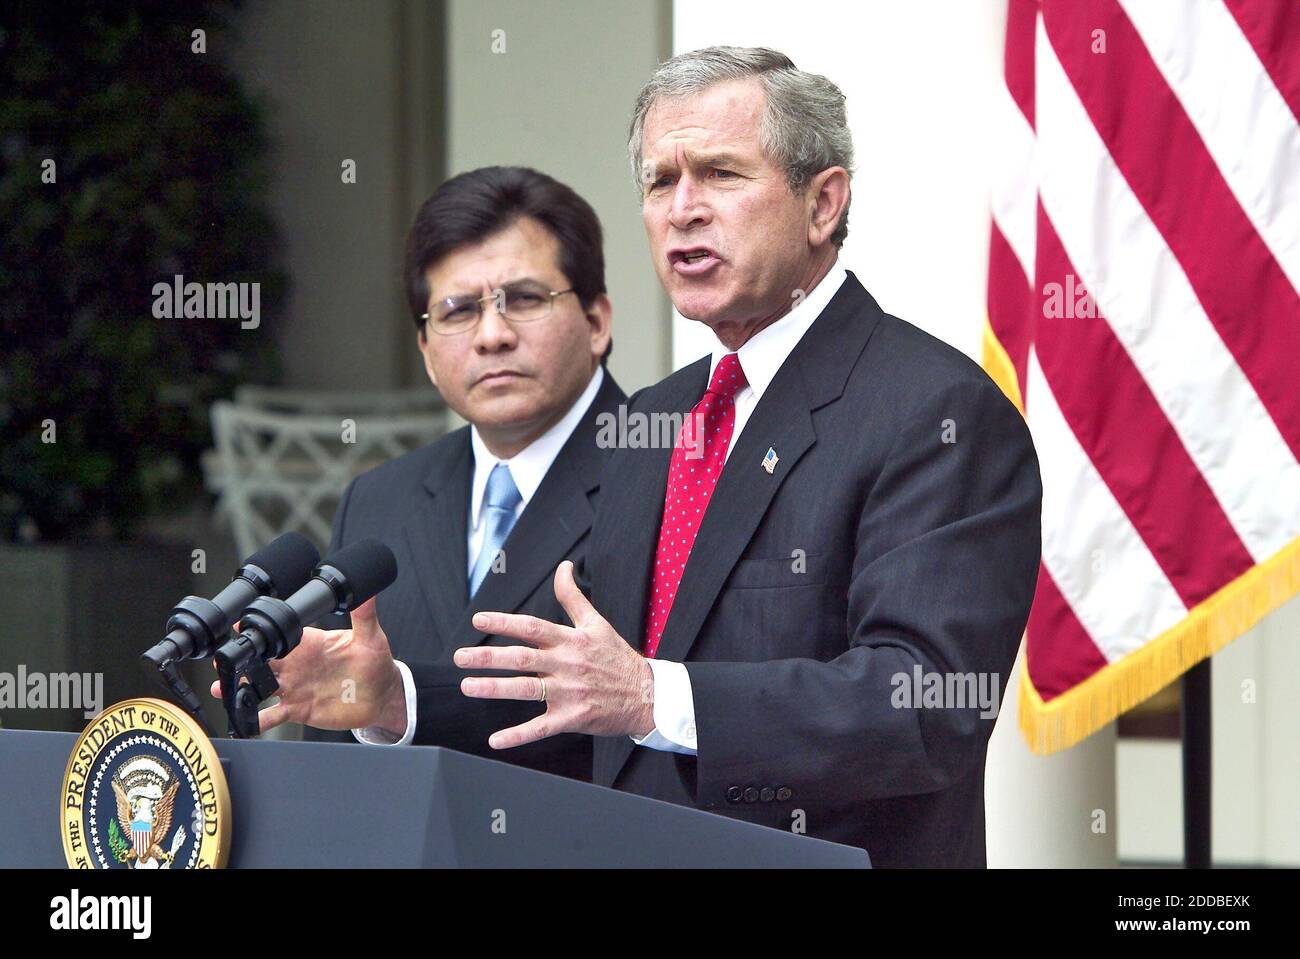 NO FILM, NO VIDEO, NO TV, NO DOCUMENTARY - U.S. President George W. Bush makes remarks on Judicial Independence and the Judicial Confirmation Process as White House Counsel Alberto Gonzales looks on from the Rose Garden at The White House in Washington, D.C. on Friday, May 9, 2003. President Bush has chosen White House counsel Alberto Gonzales, a Texas confidant and the most prominent Hispanic in the administration, to succeed Attorney General John Ashcroft. November 10, 2004. Photo by Chuck Kennedy/KRT/ABACA. Stock Photo